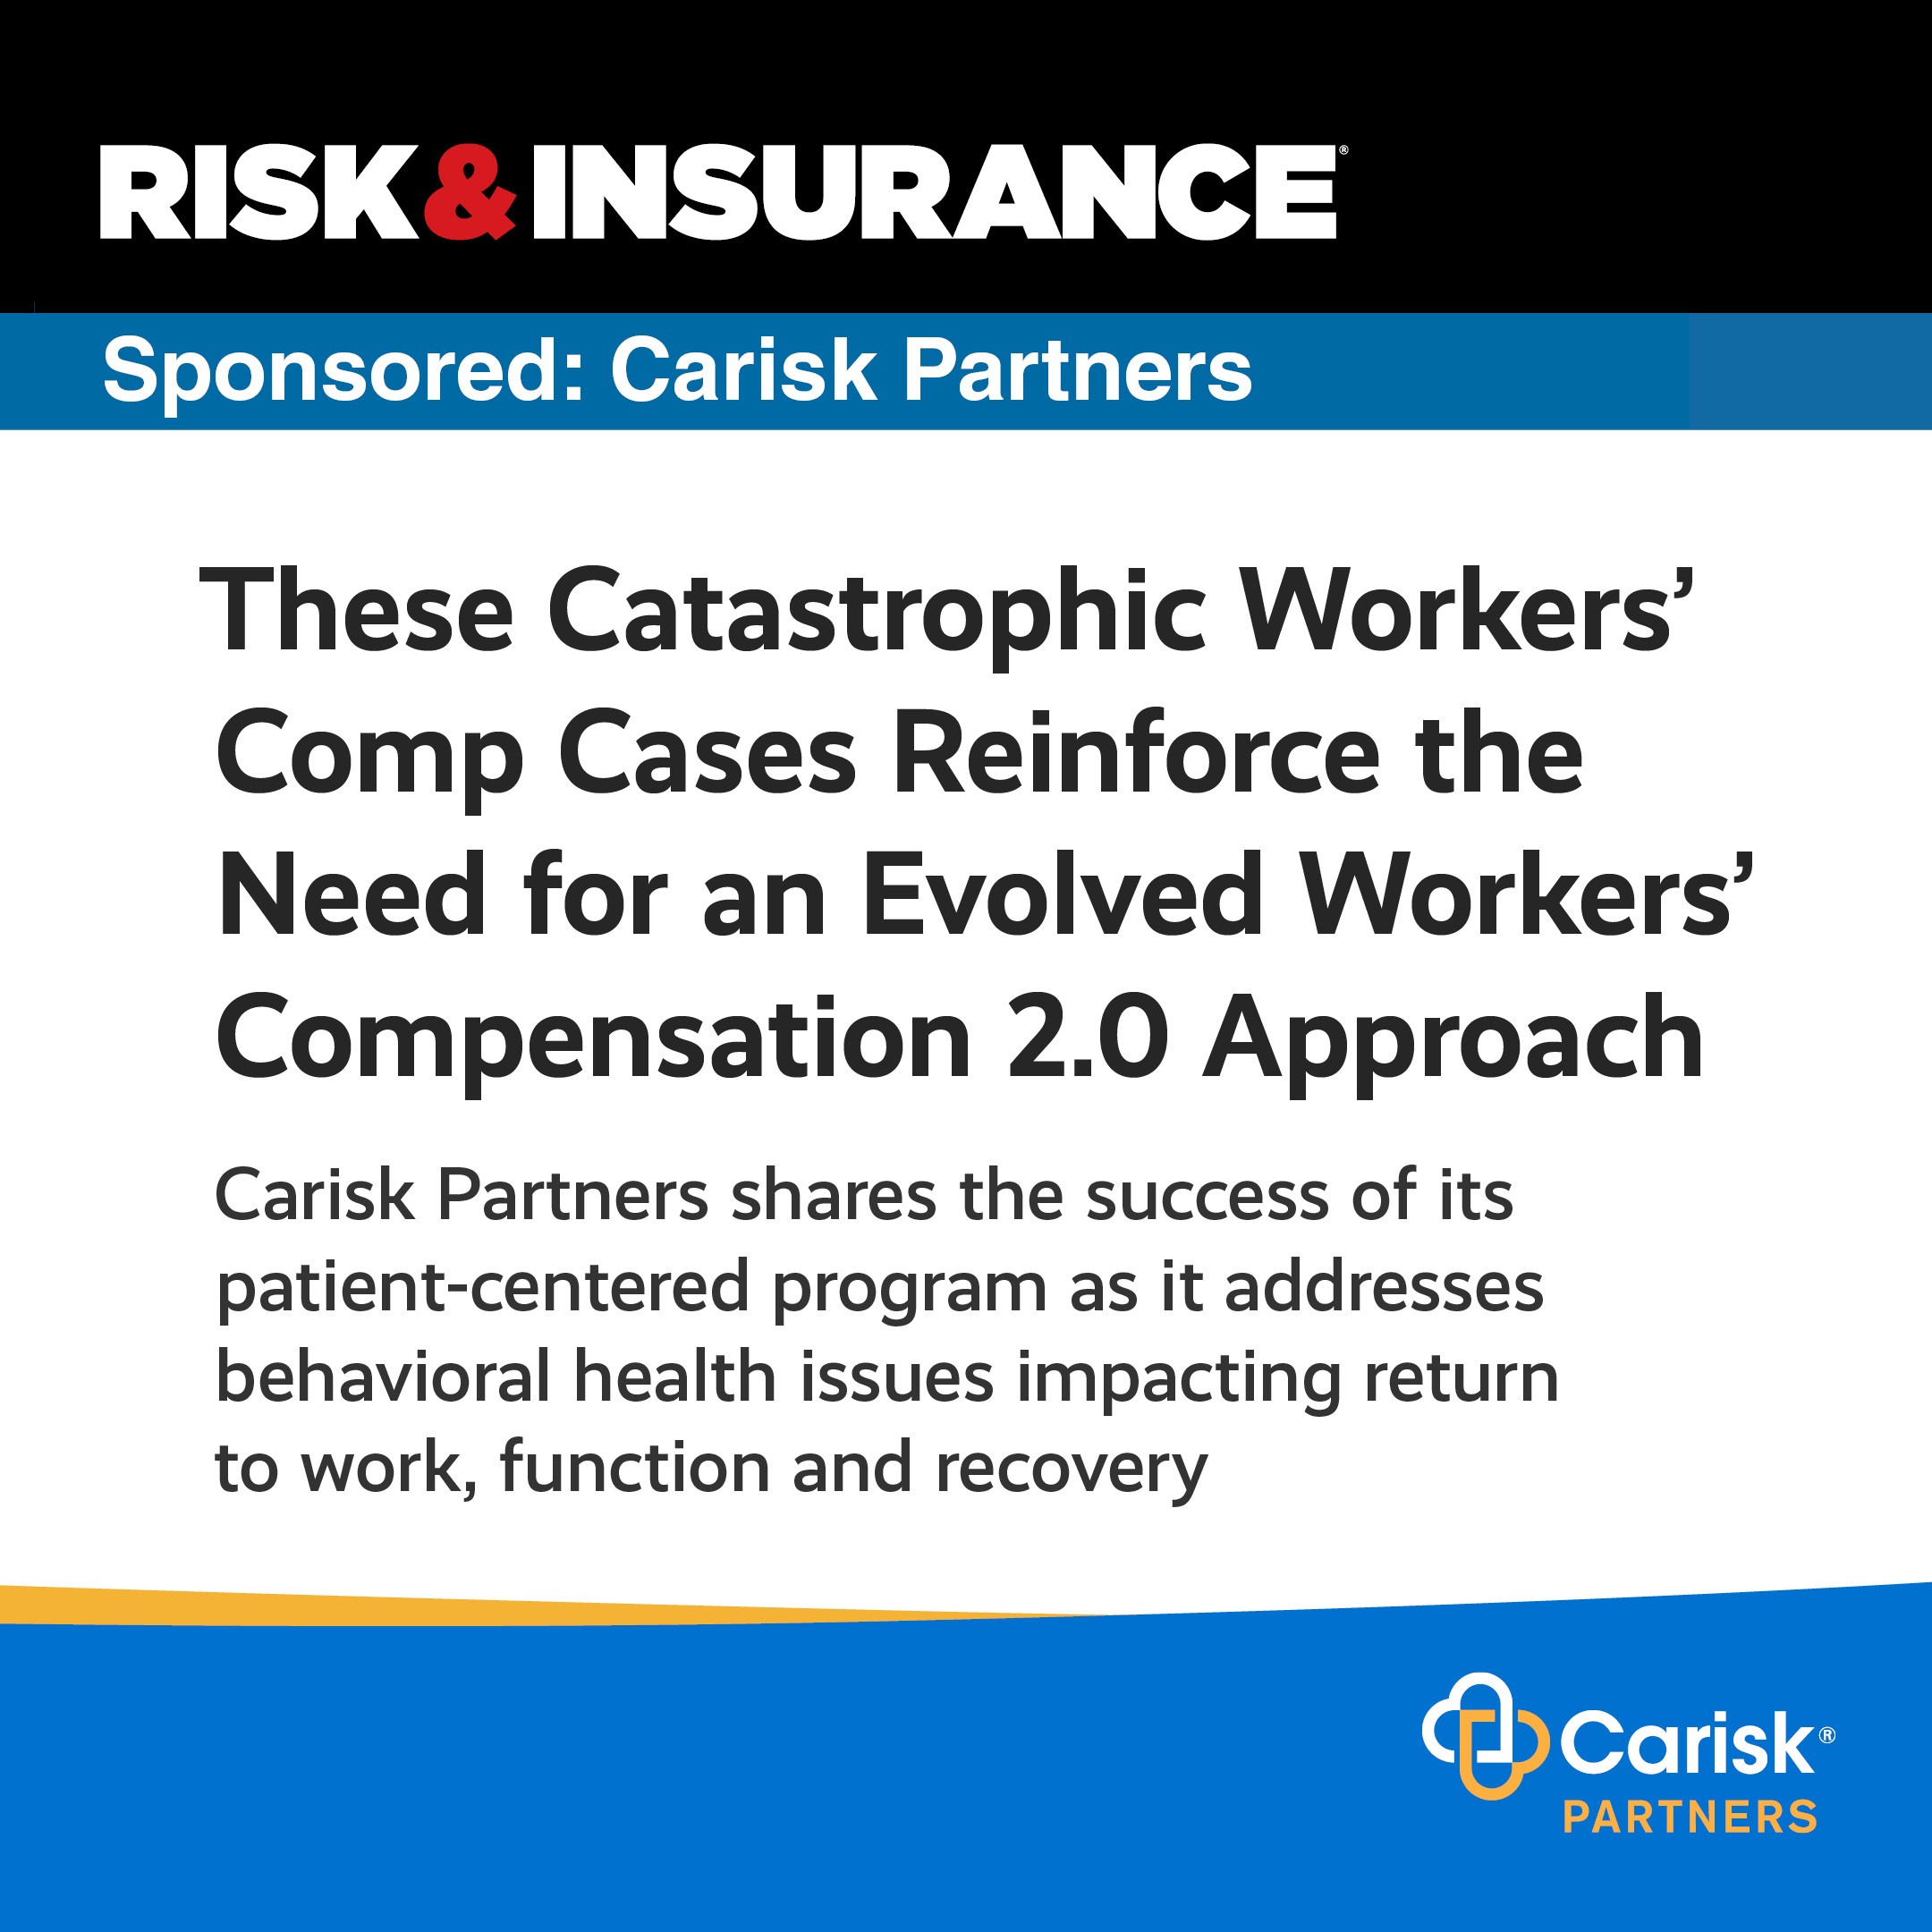 These Catastrophic Workers’ Comp Cases Reinforce the Need for an Evolved Workers’ Compensation 2.0 Approach